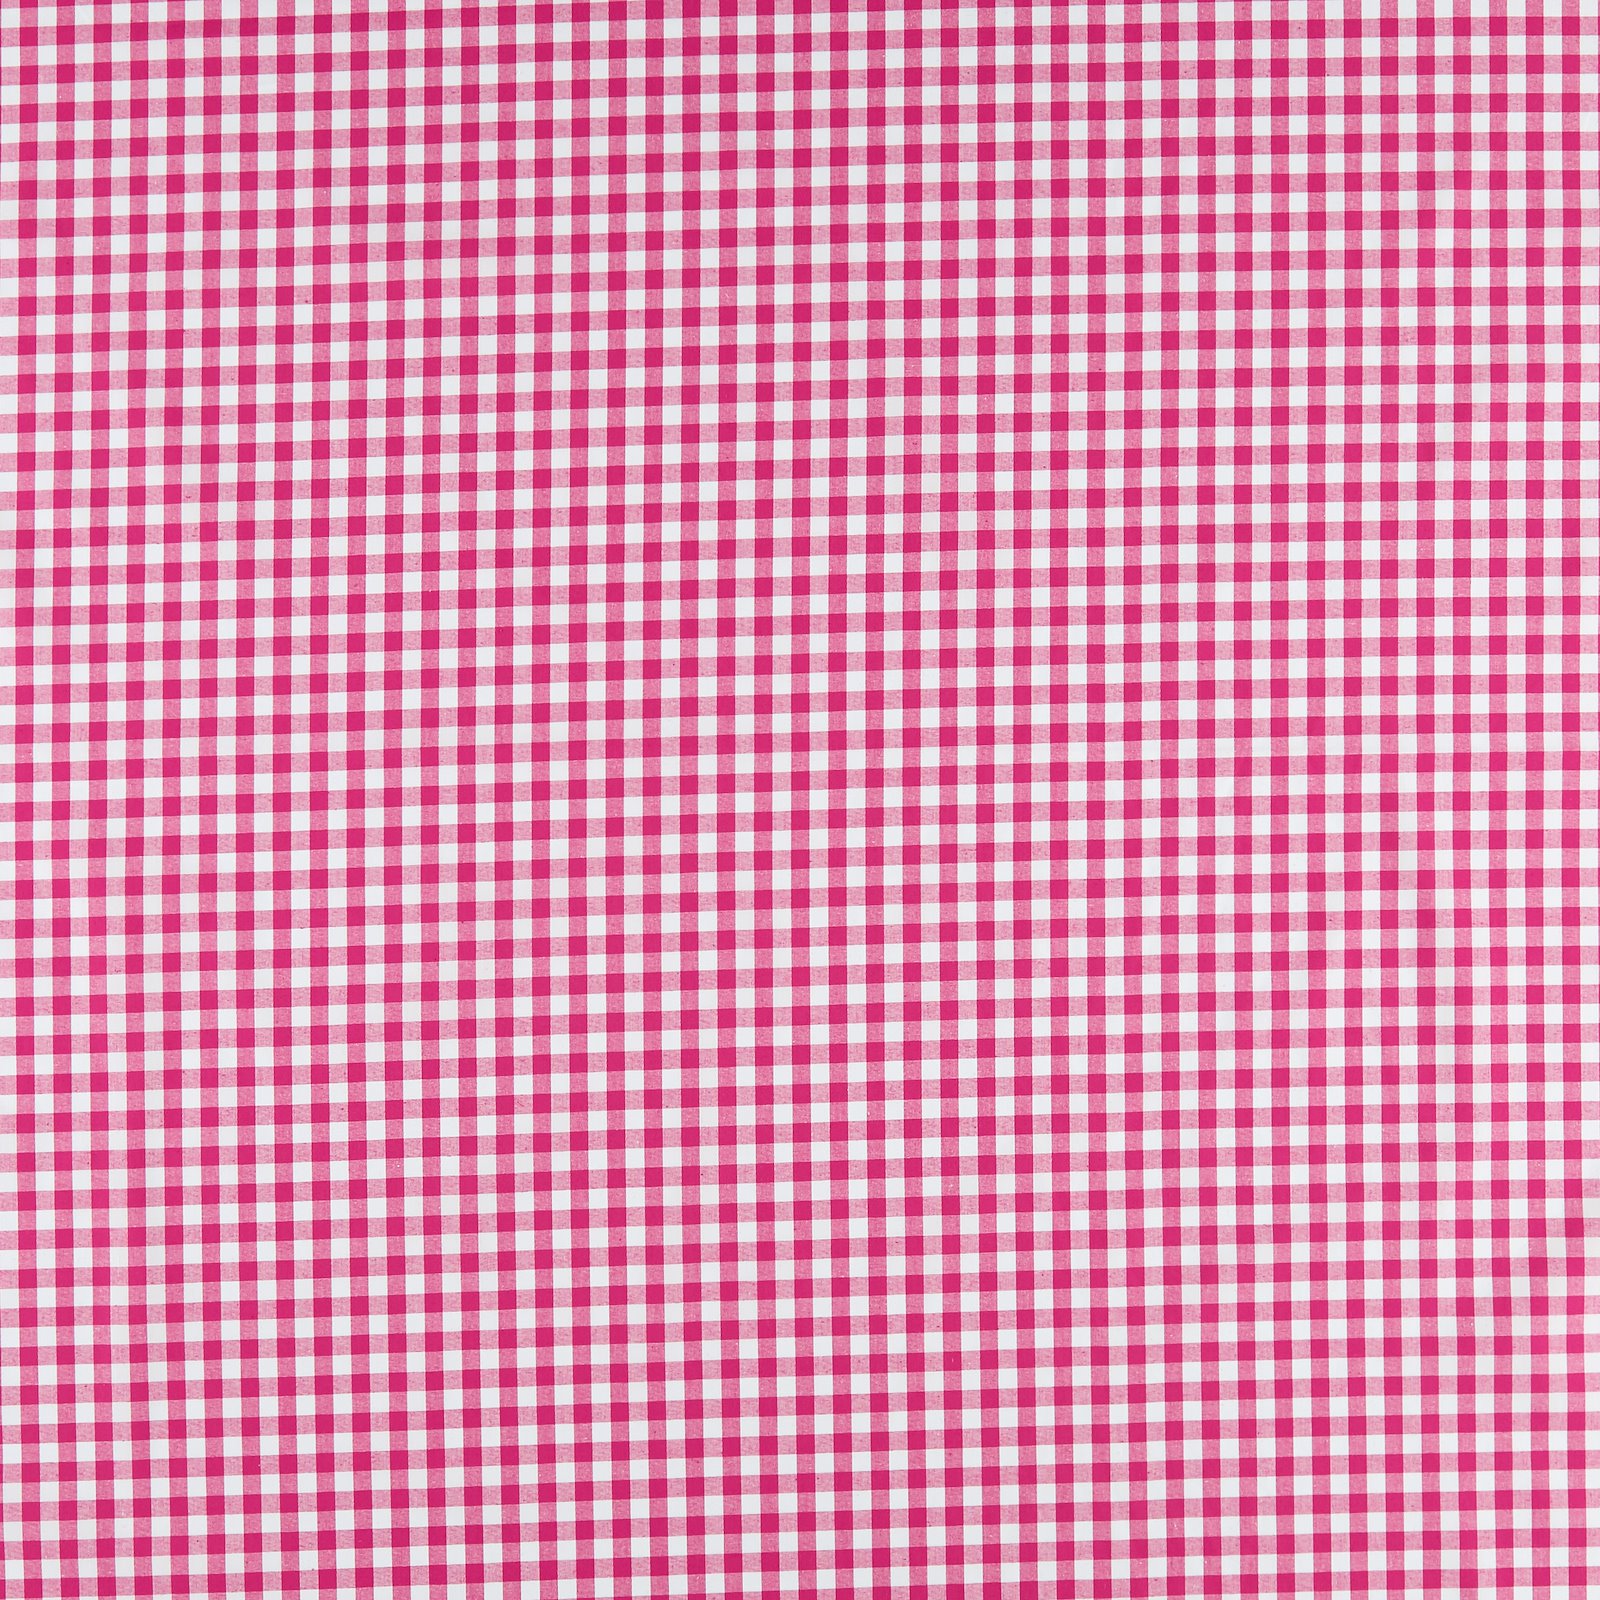 Cotton yarn dyed pink/white check 780888_pack_sp